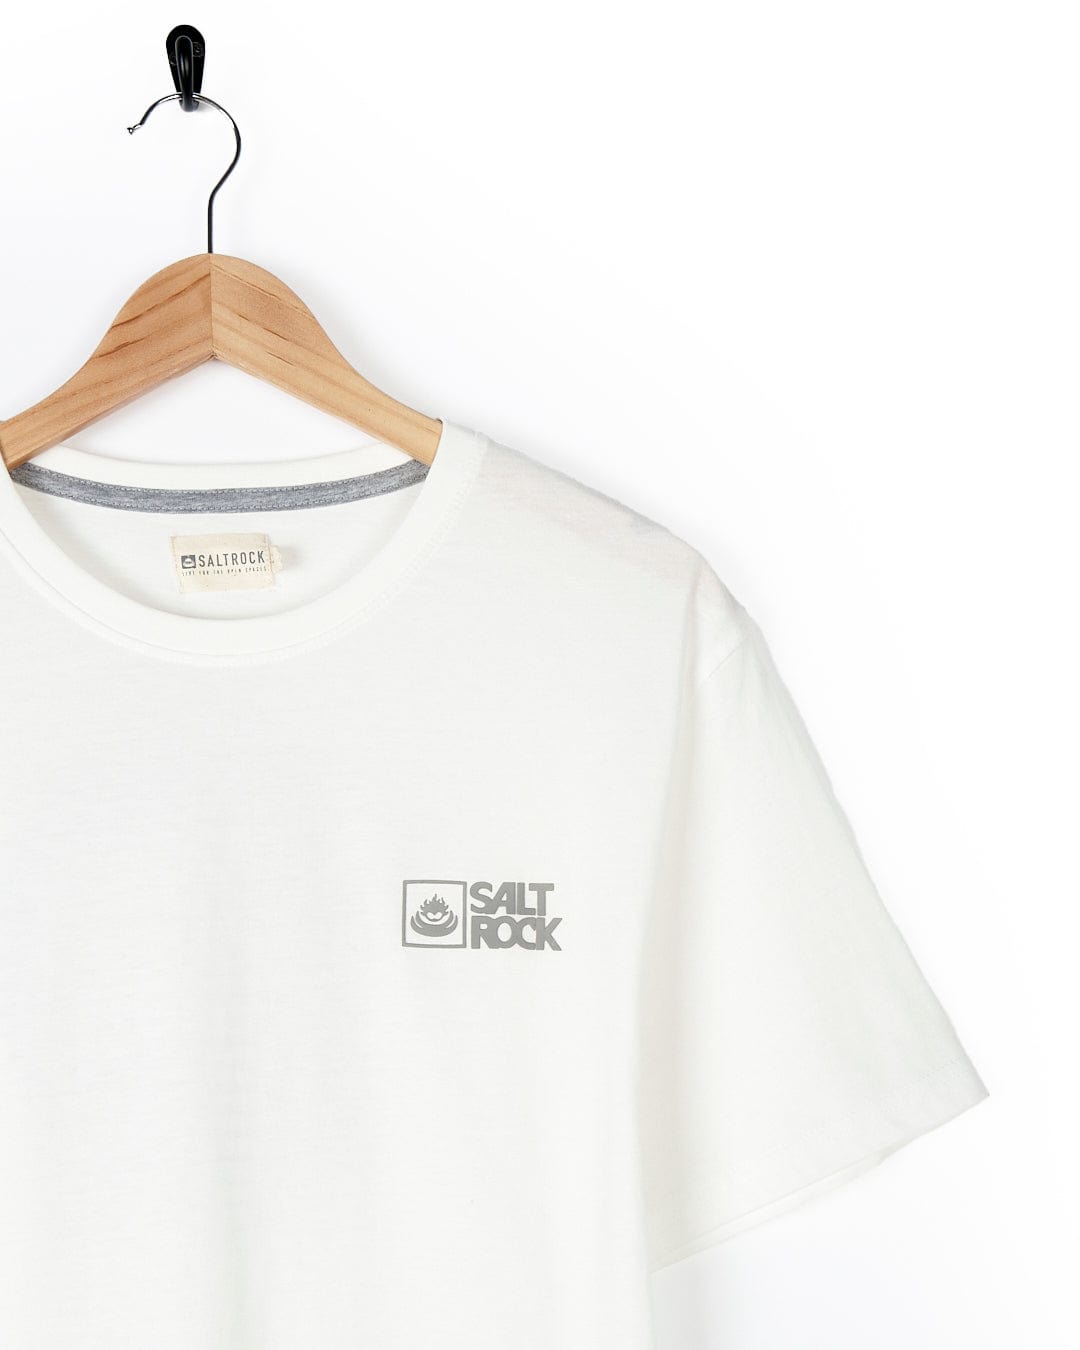 A Saltrock Corp Logo Fade - Mens Short Sleeve Tee - White with a logo on it.